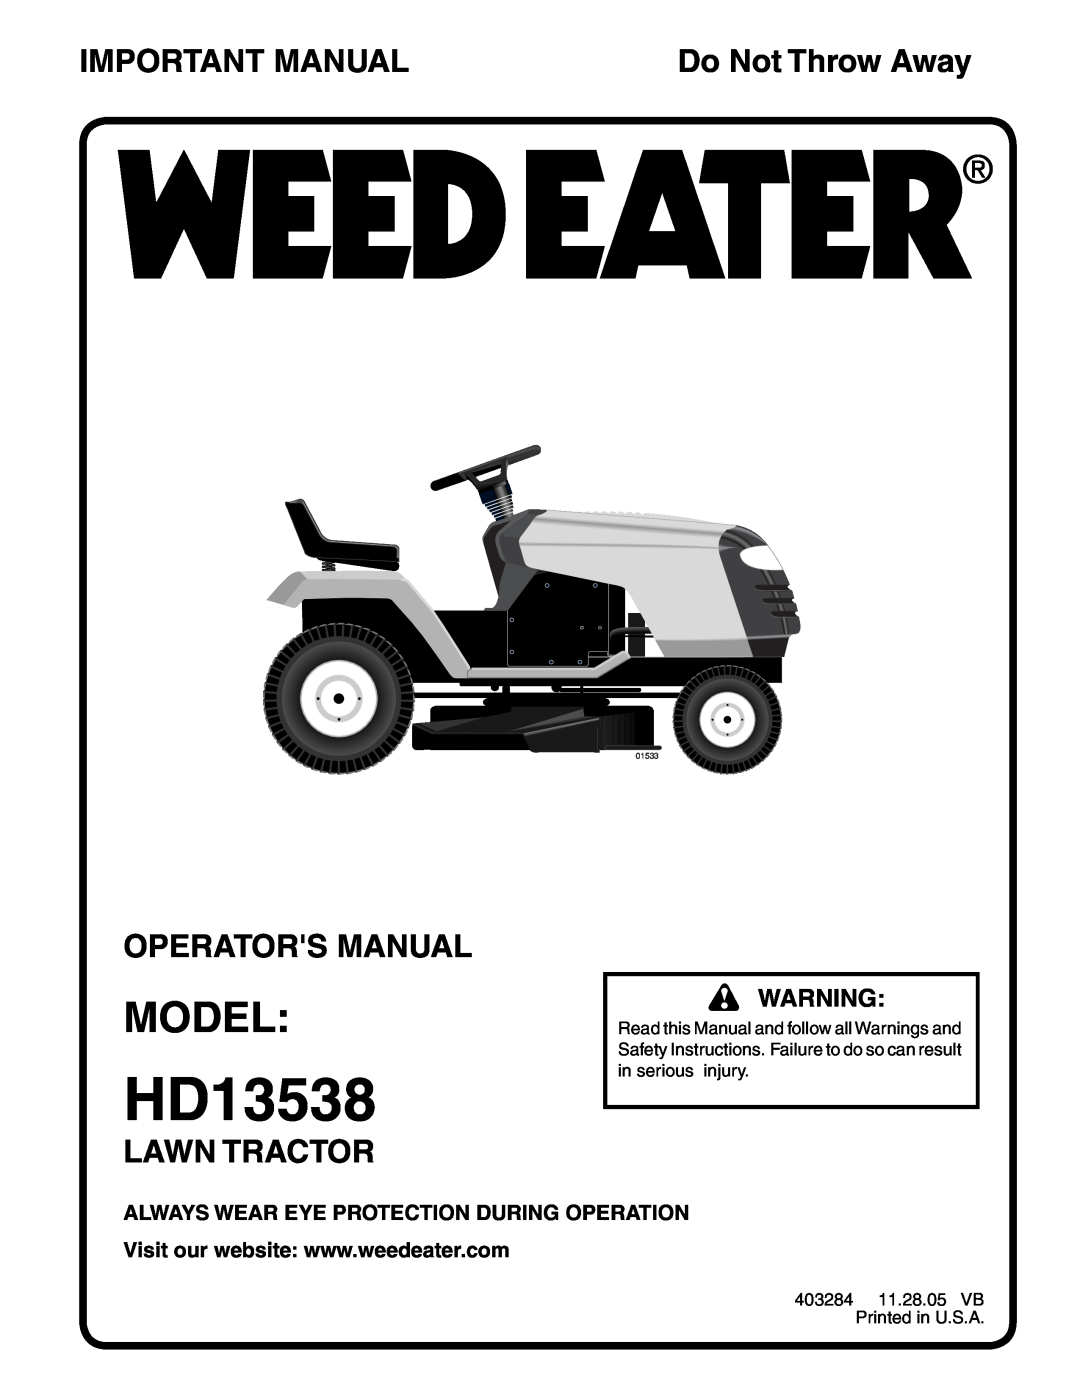 Weed Eater HD13538 manual Model, Important Manual, Operators Manual, Lawn Tractor, Do Not Throw Away, 01533 